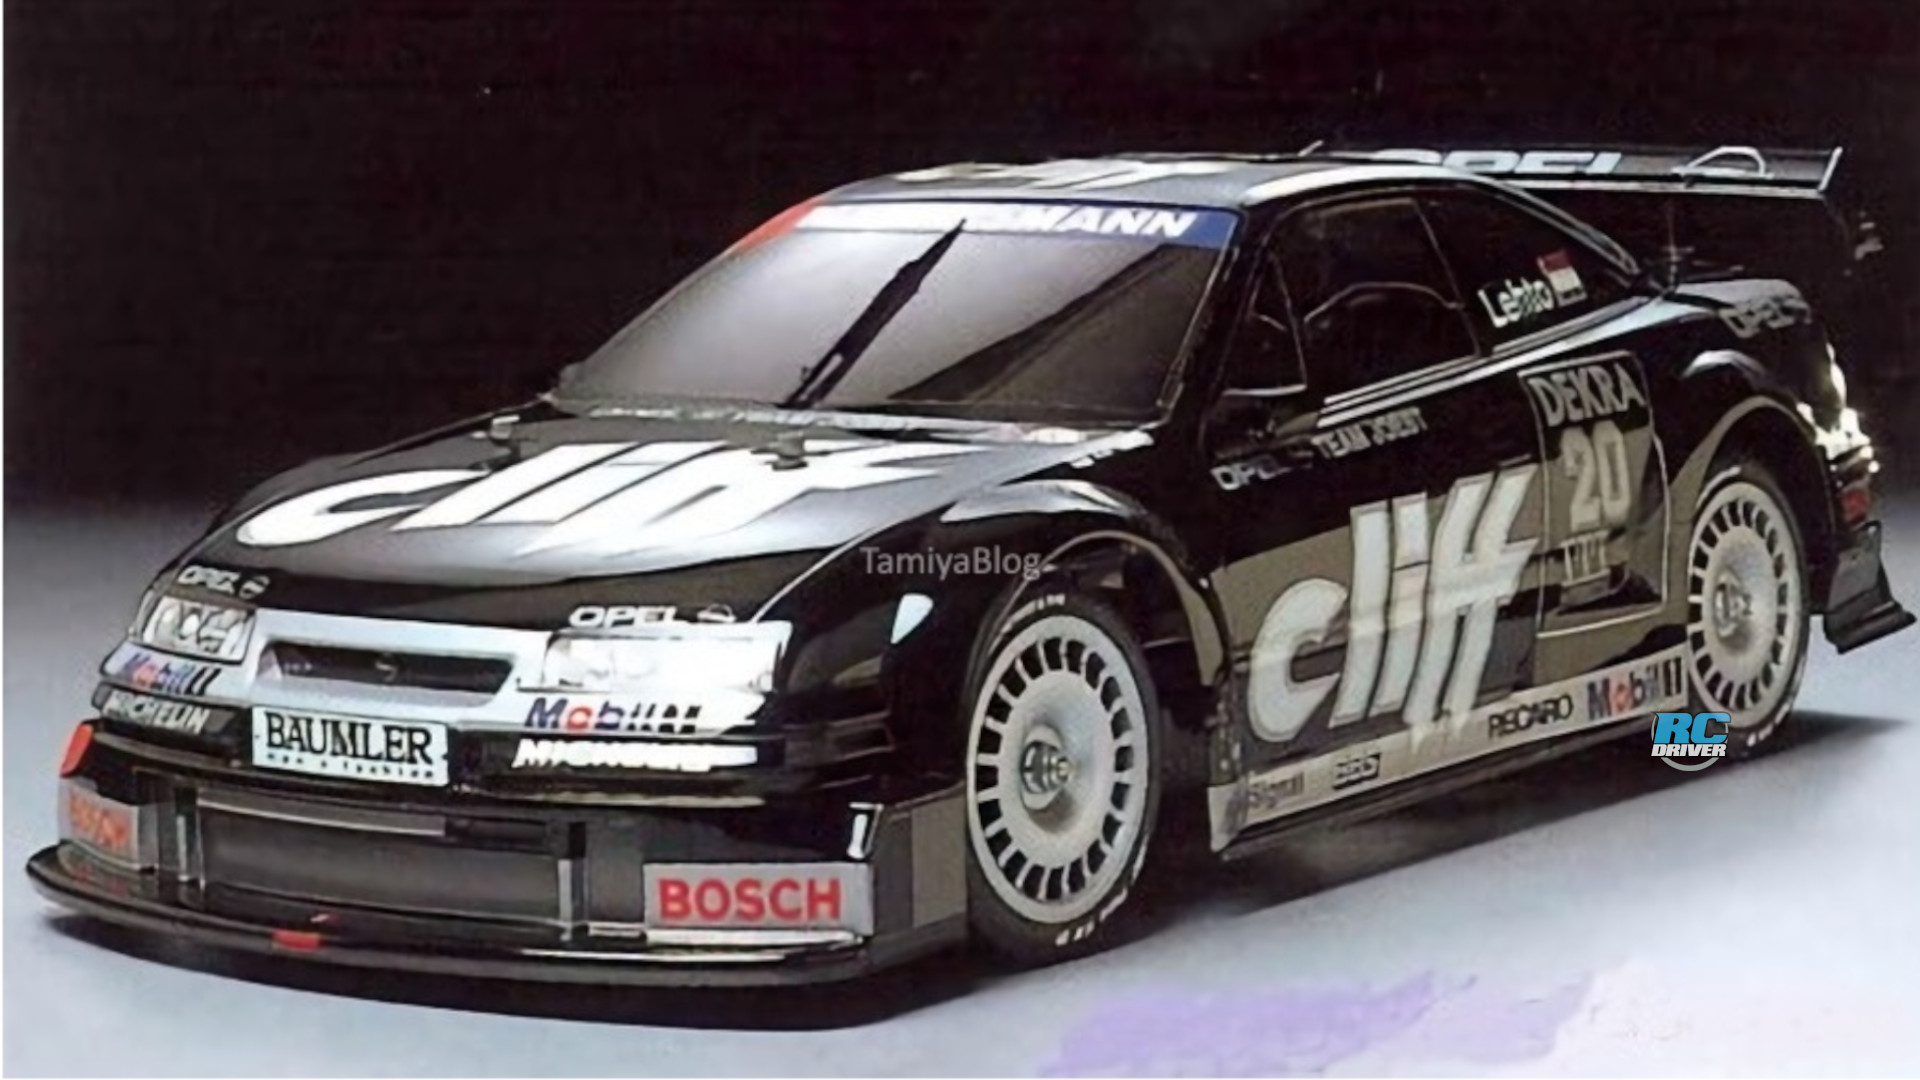 Tamiya Opel Calibra V6 Cliff Announced For Future Release